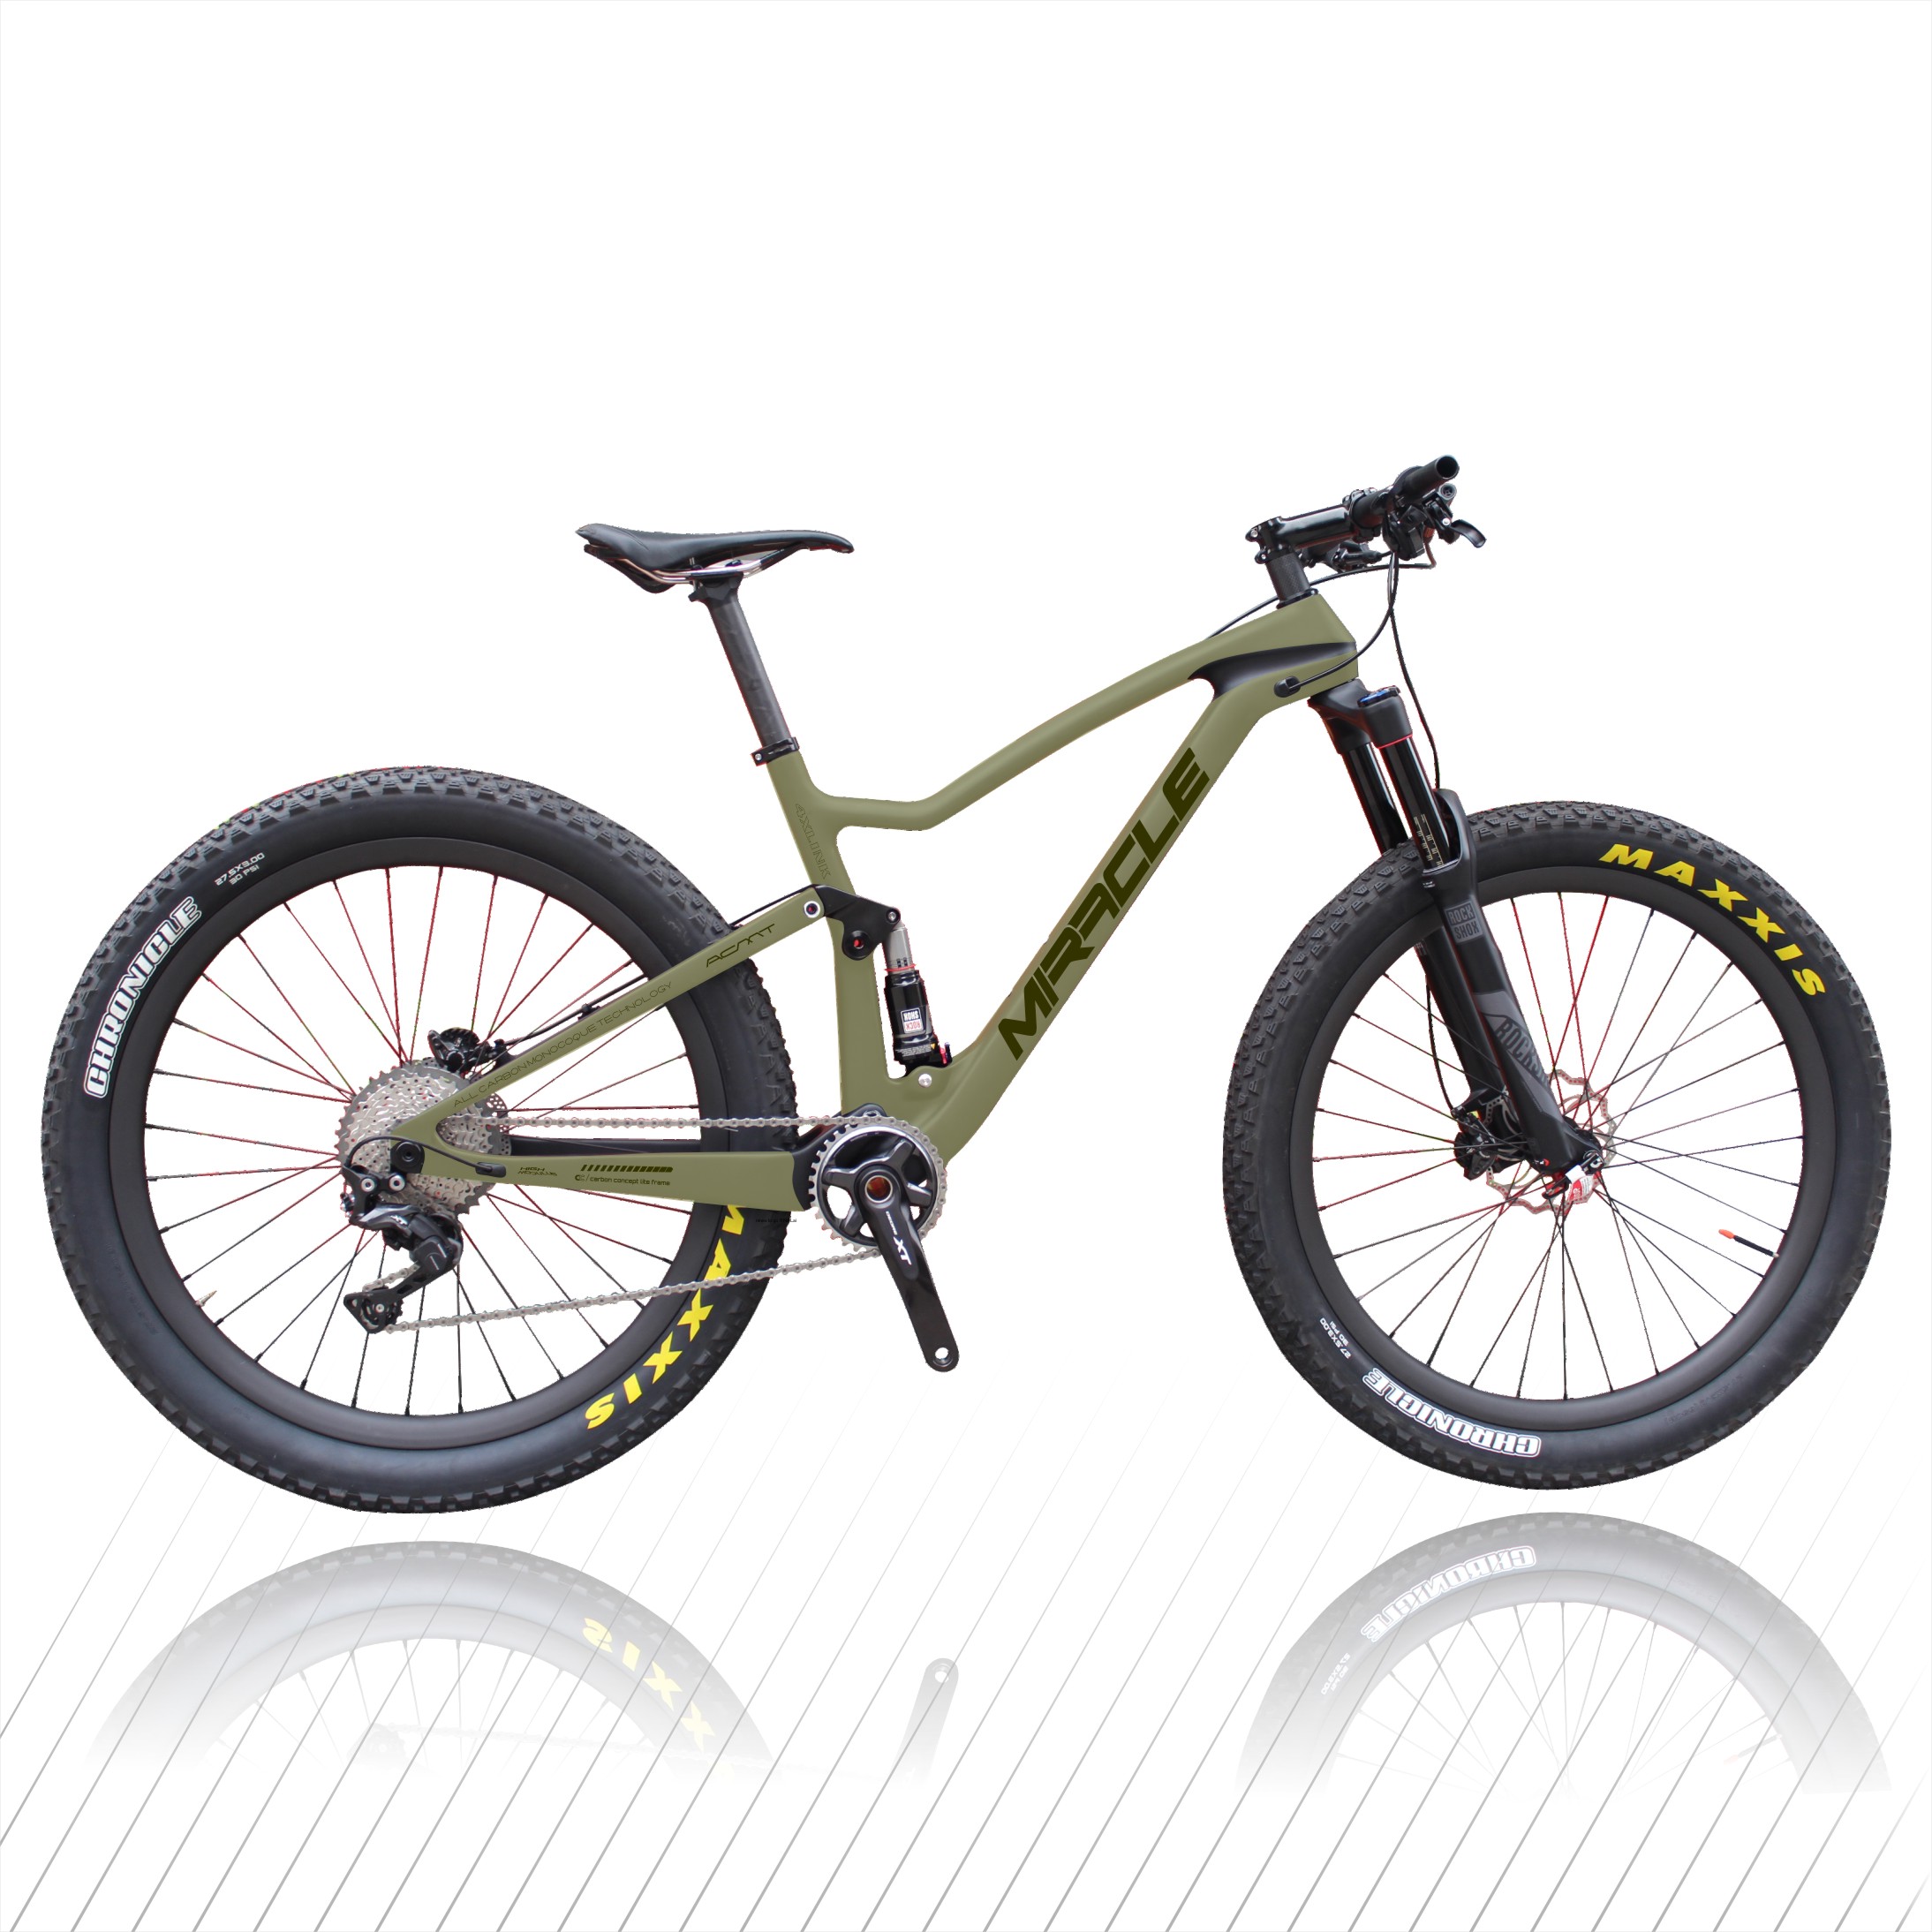 2020 Super Light 29er Boosts Carbon MTB Full Bicycle Mountain Bike Complete High Quality